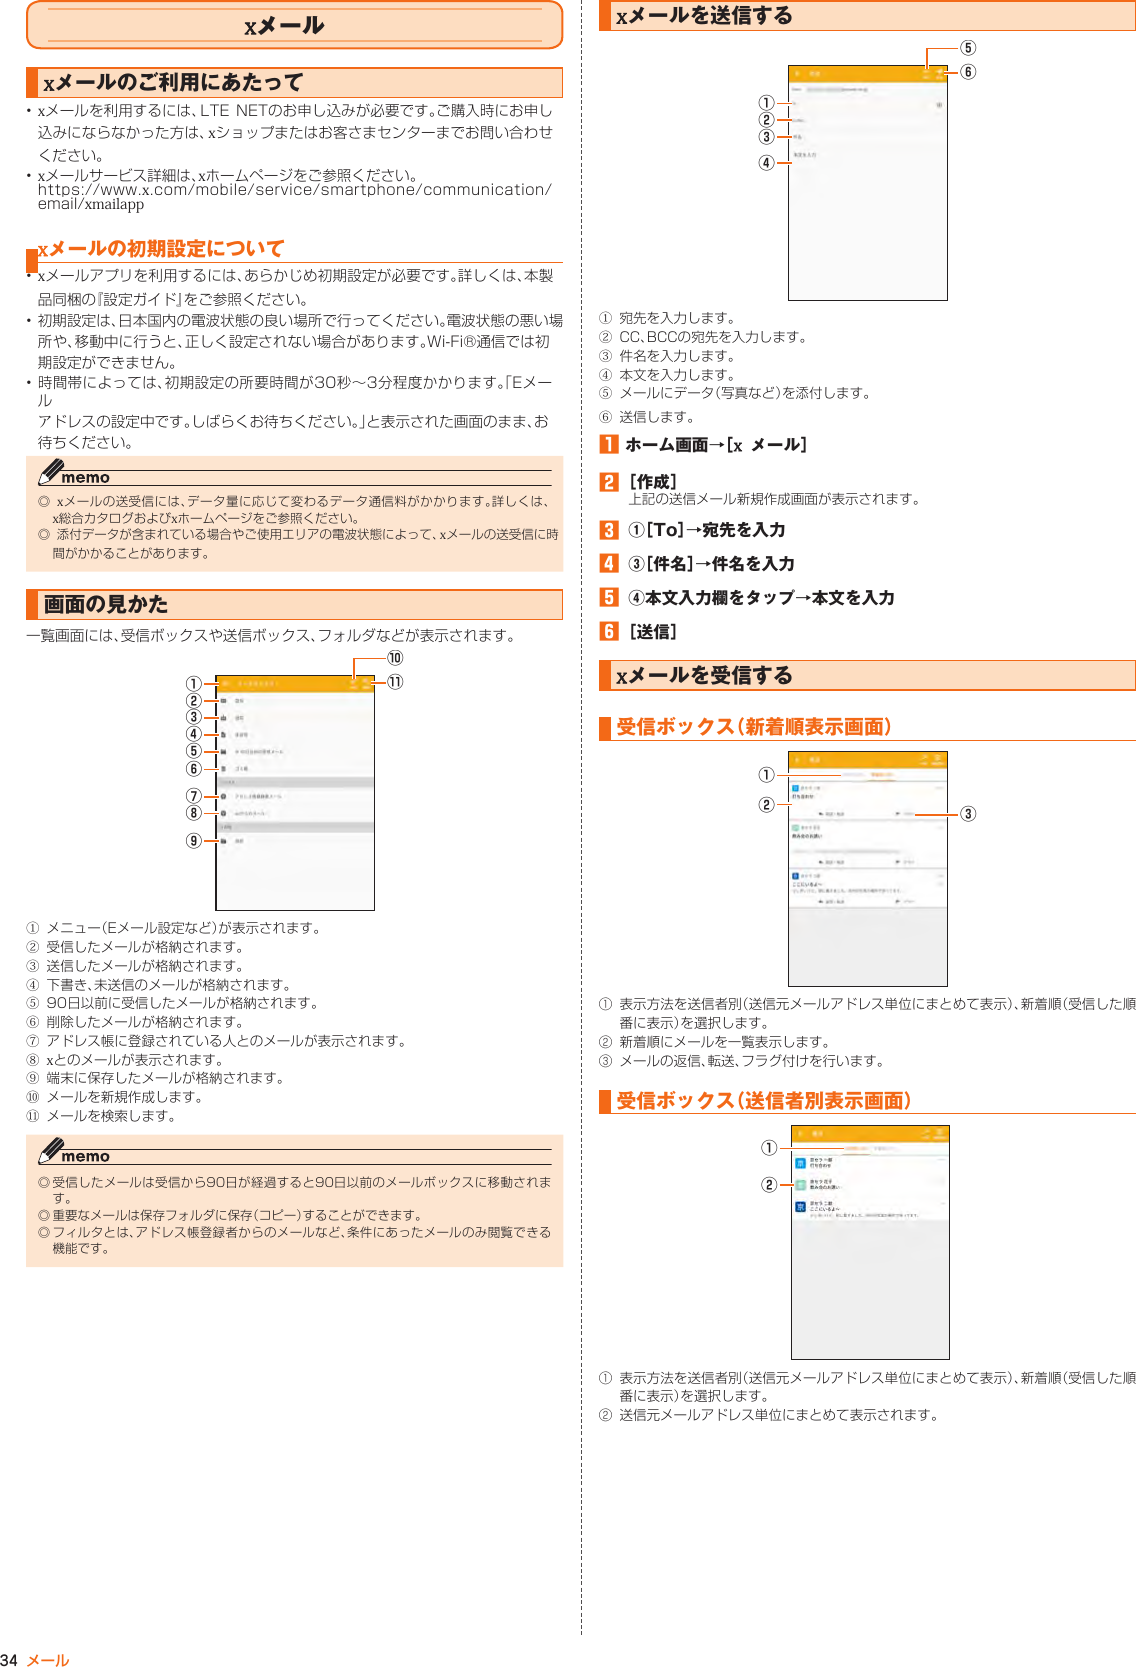 Page 31 of Kyocera FA51 Tablet User Manual part 2